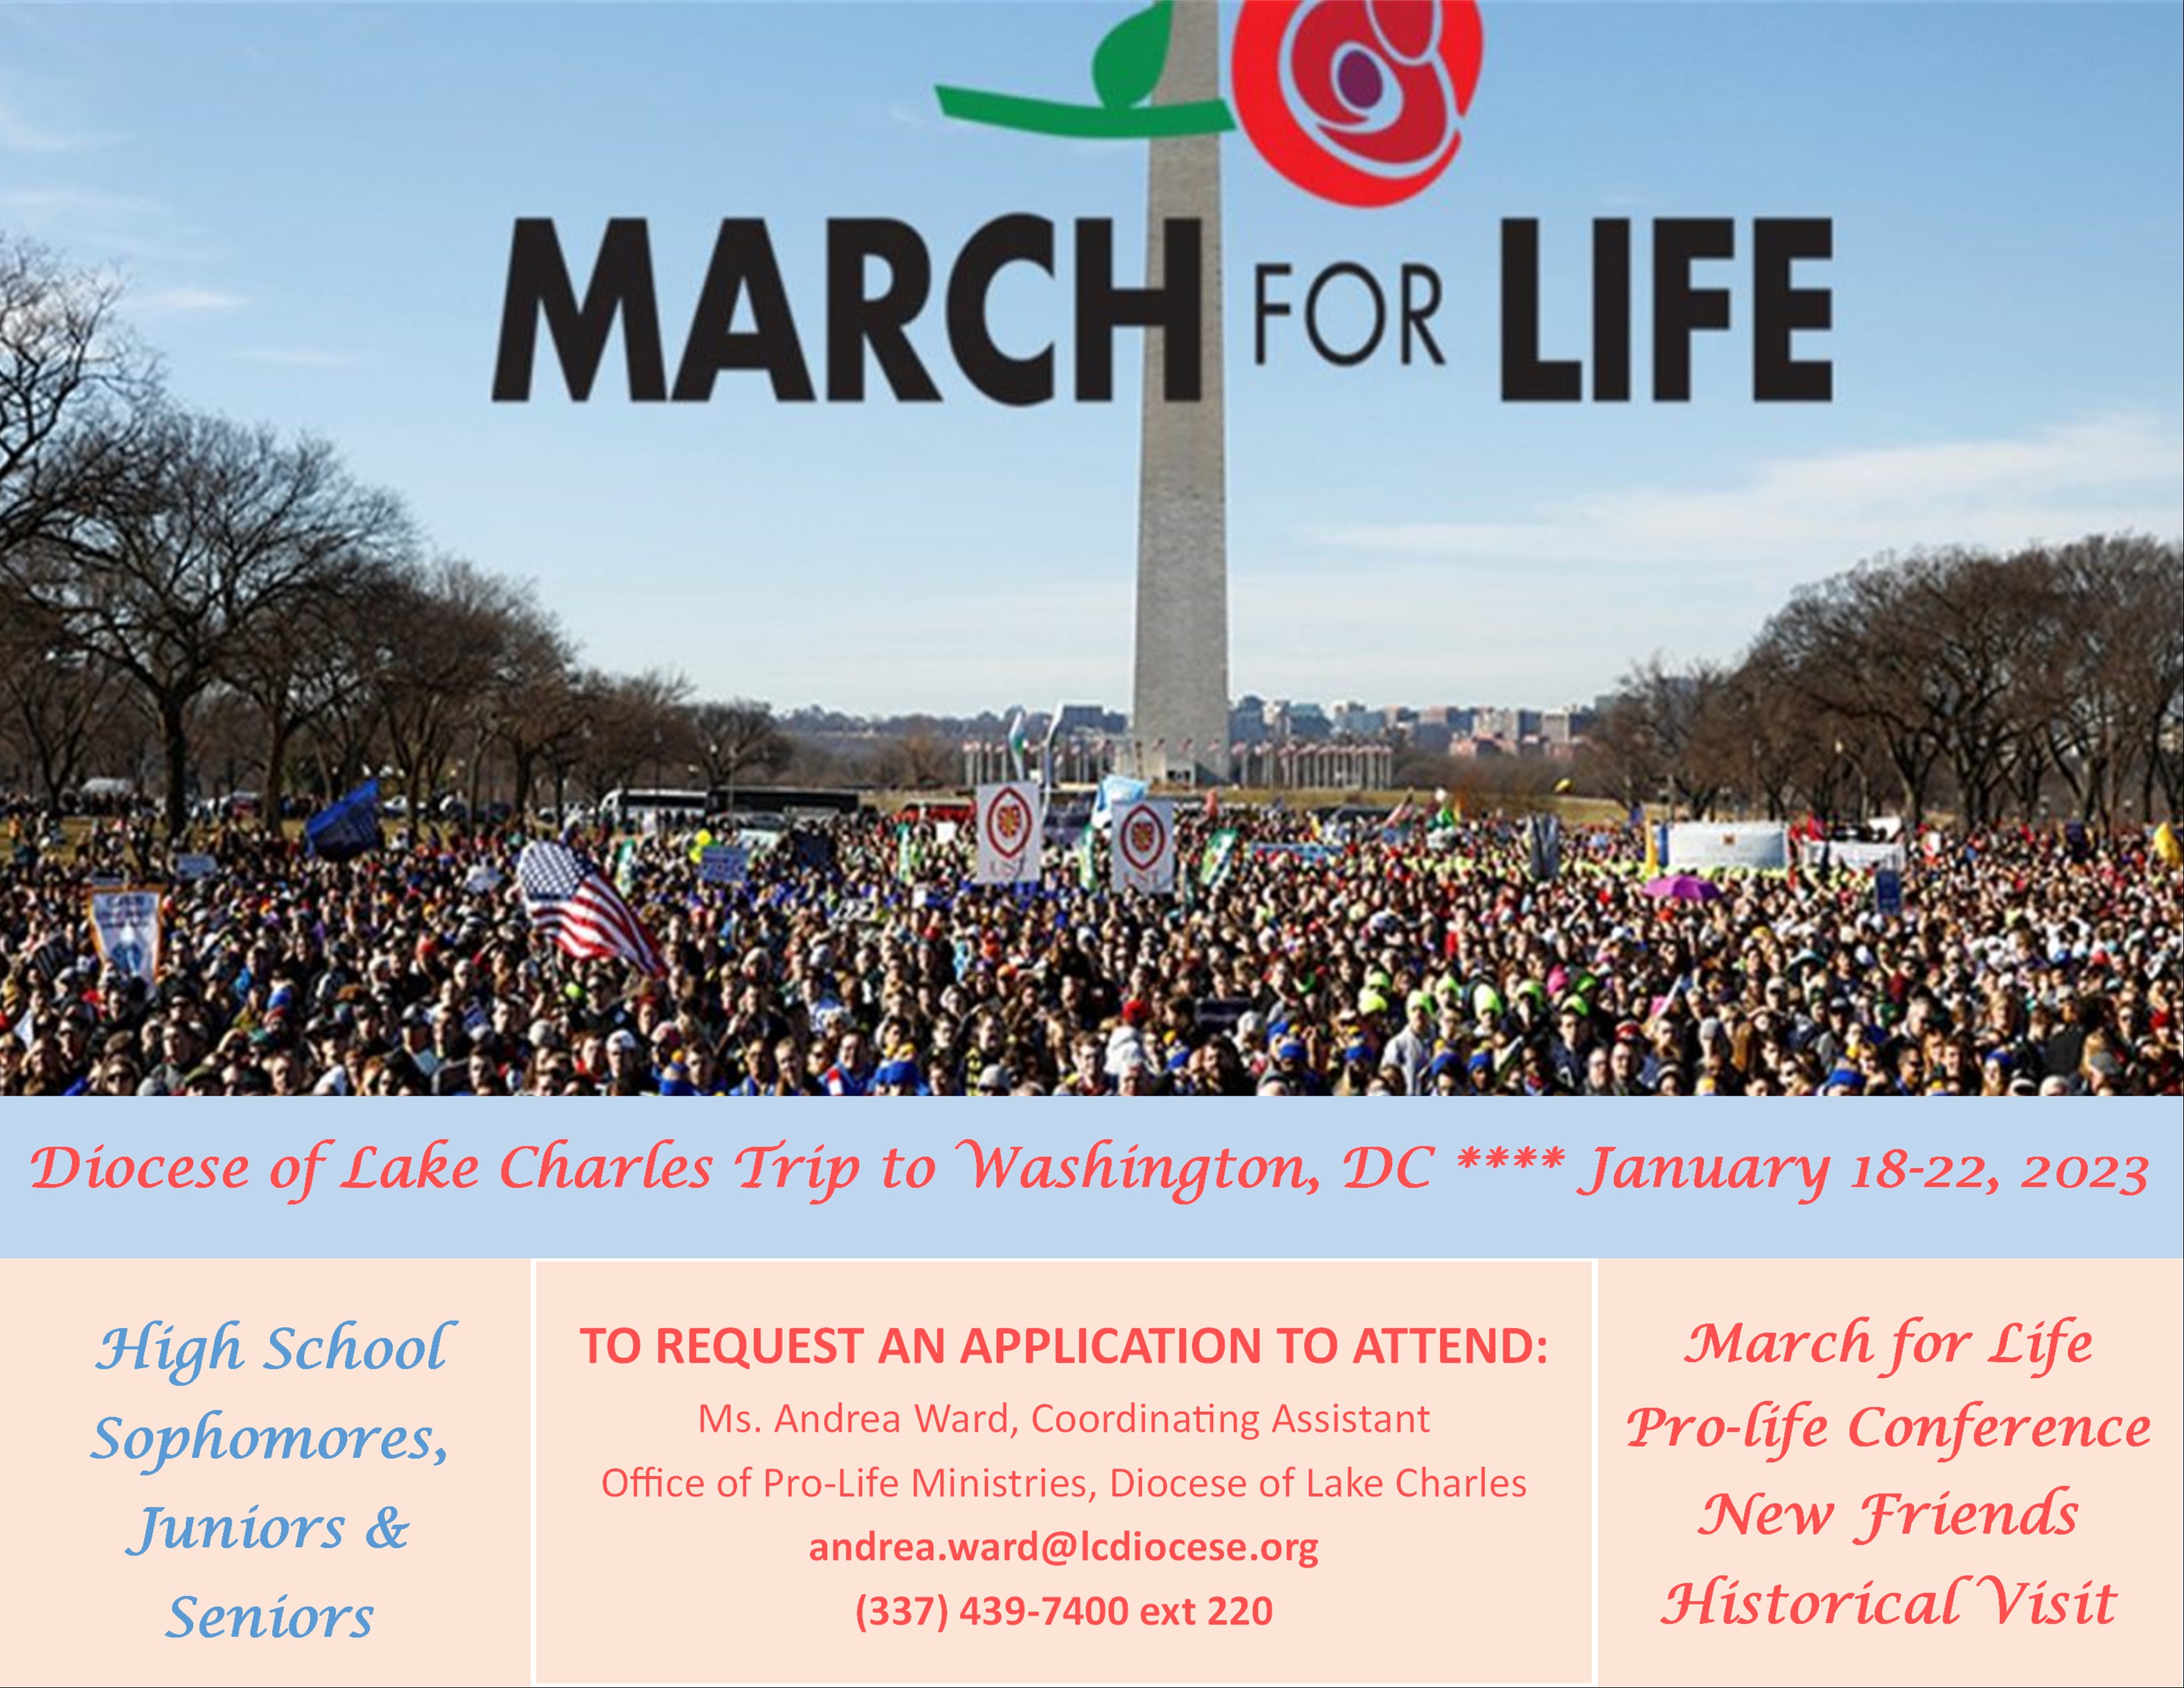 High Schoolers March for Life Trip Planned in 2023 Diocese of Lake